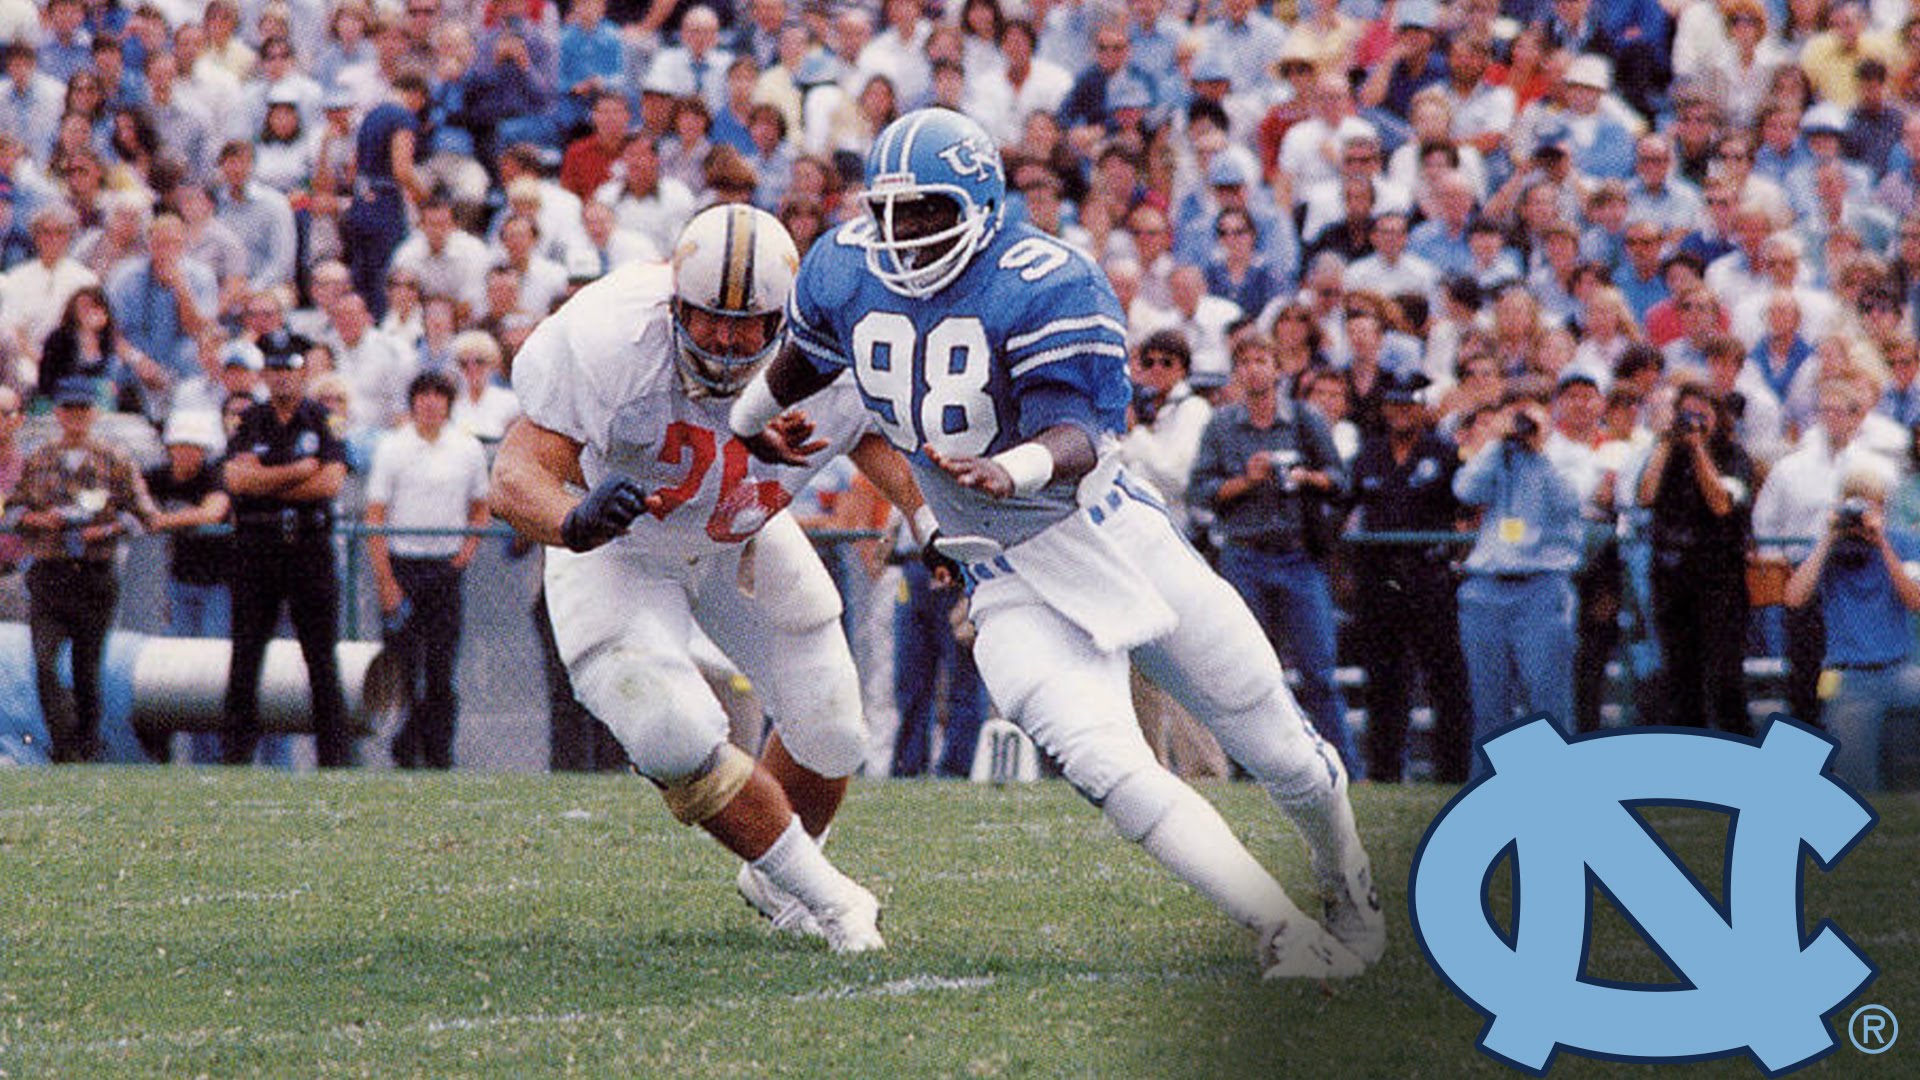 UNC Football: Lawrence Taylor Led UNC To Last ACC Title in 1980 ...